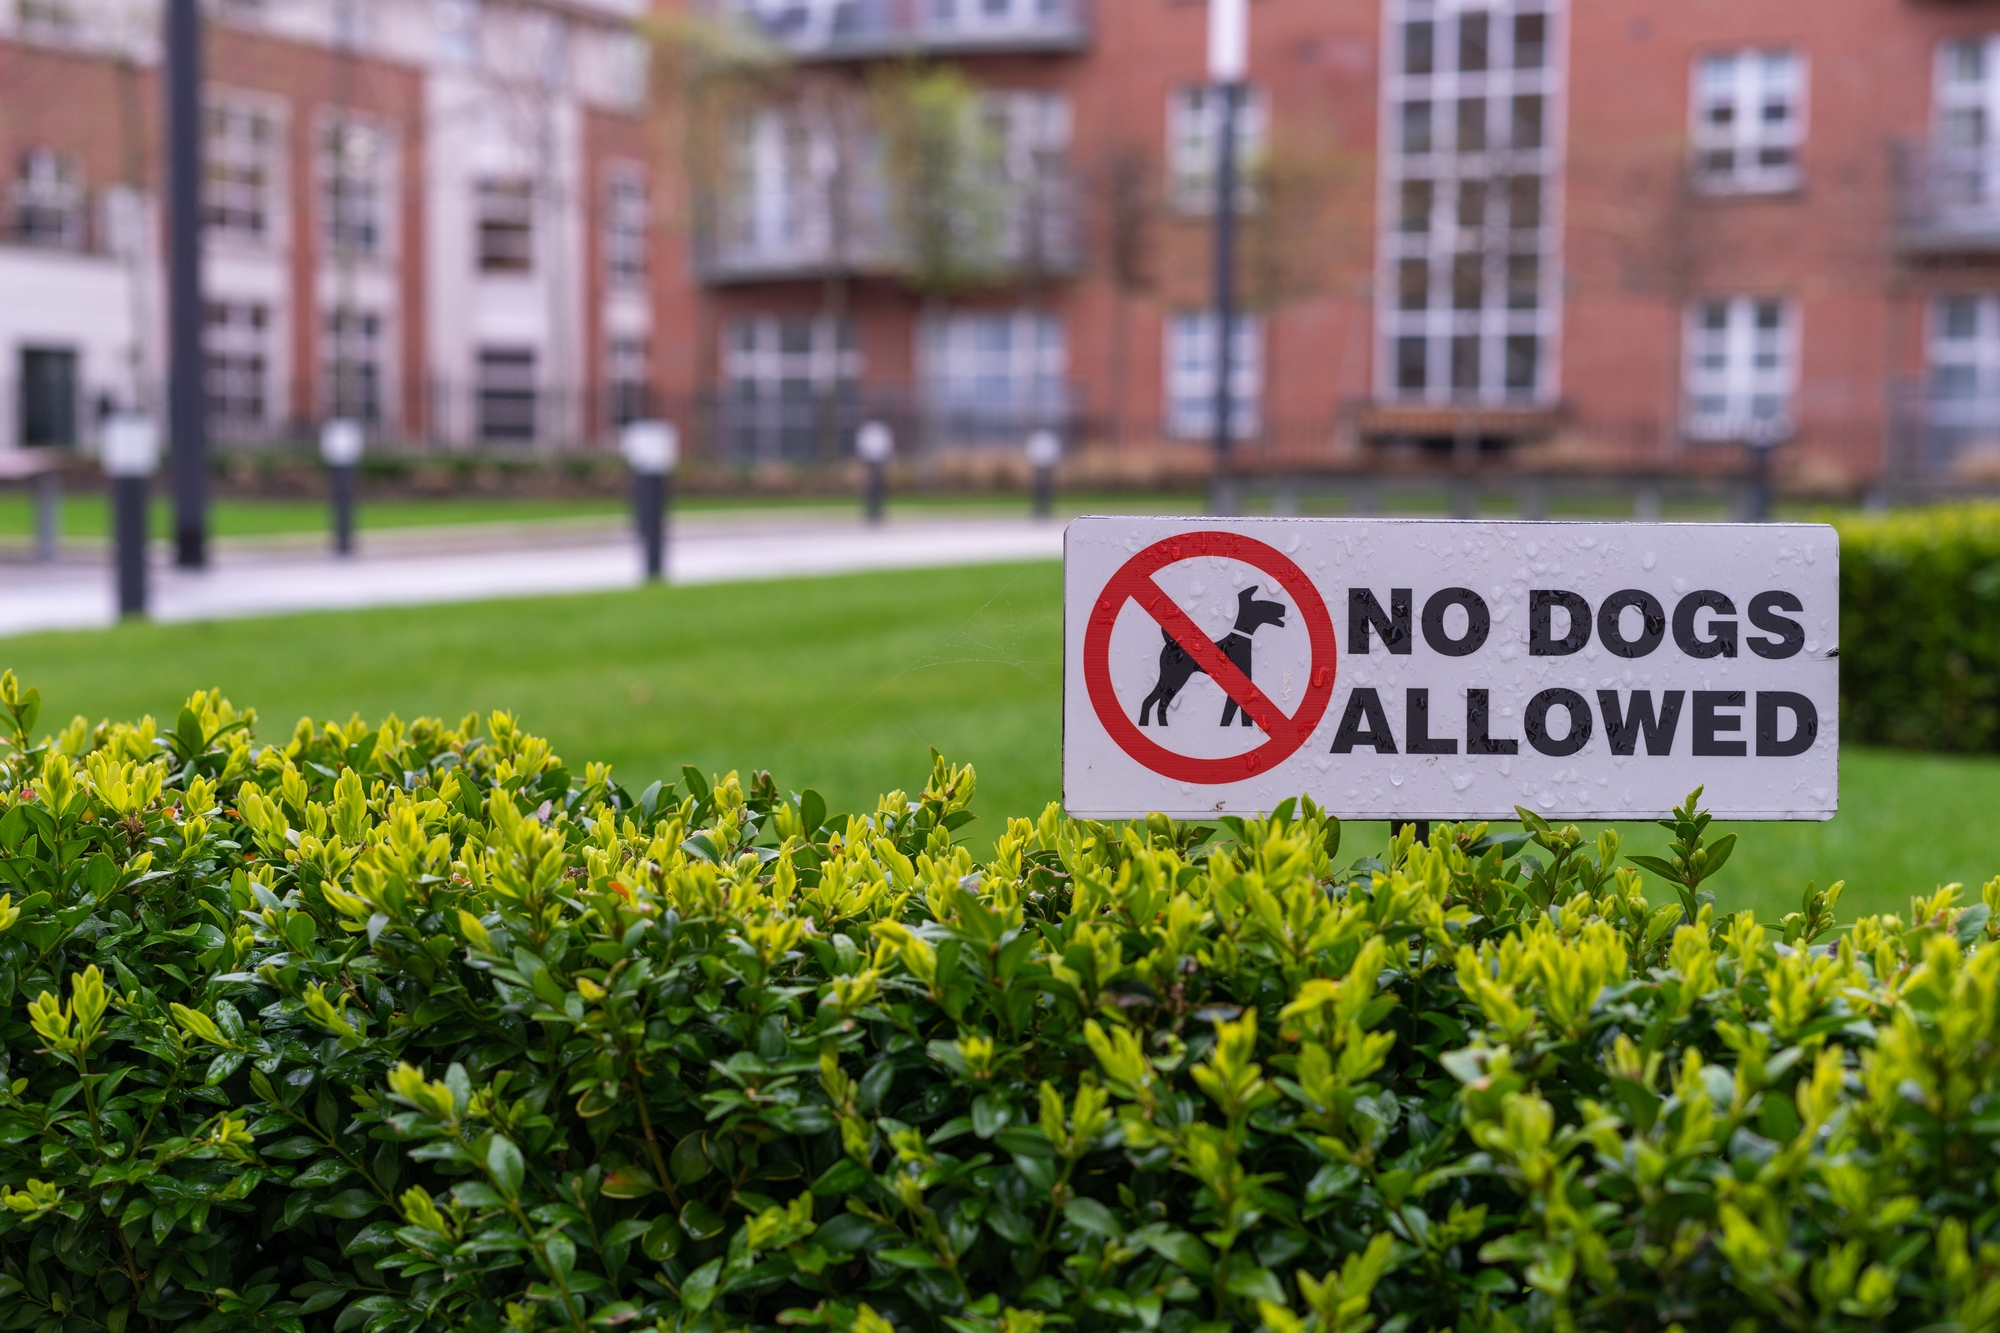 photograph of "No Dogs Allowed" sign in front of apartment complex